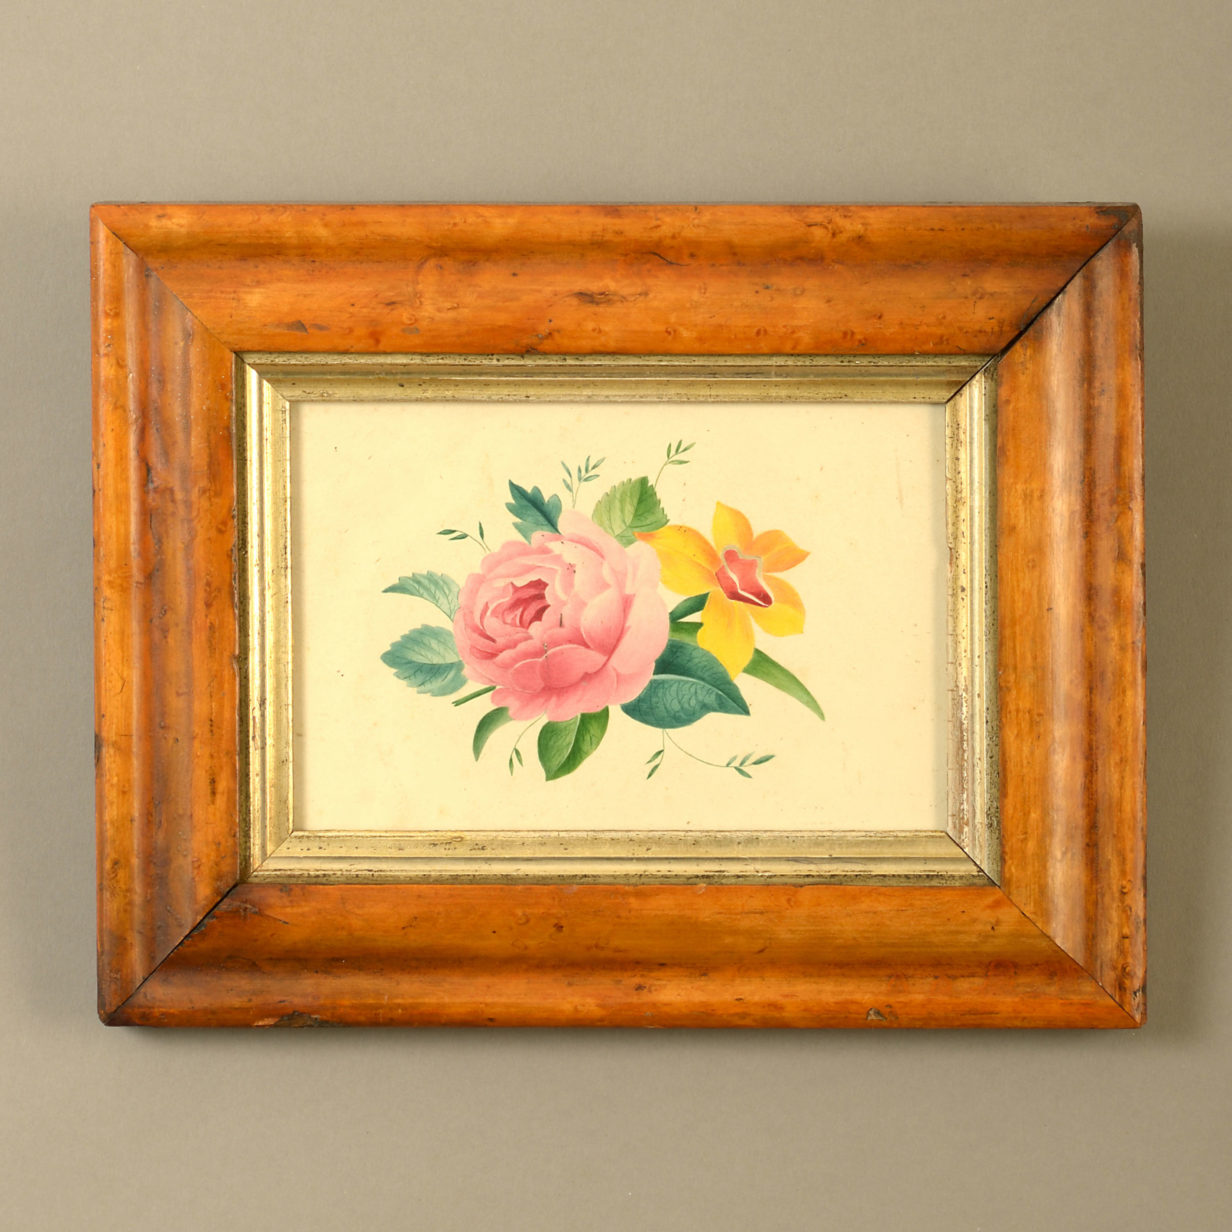 A Mid-19th Century Victorian Floral Watercolour